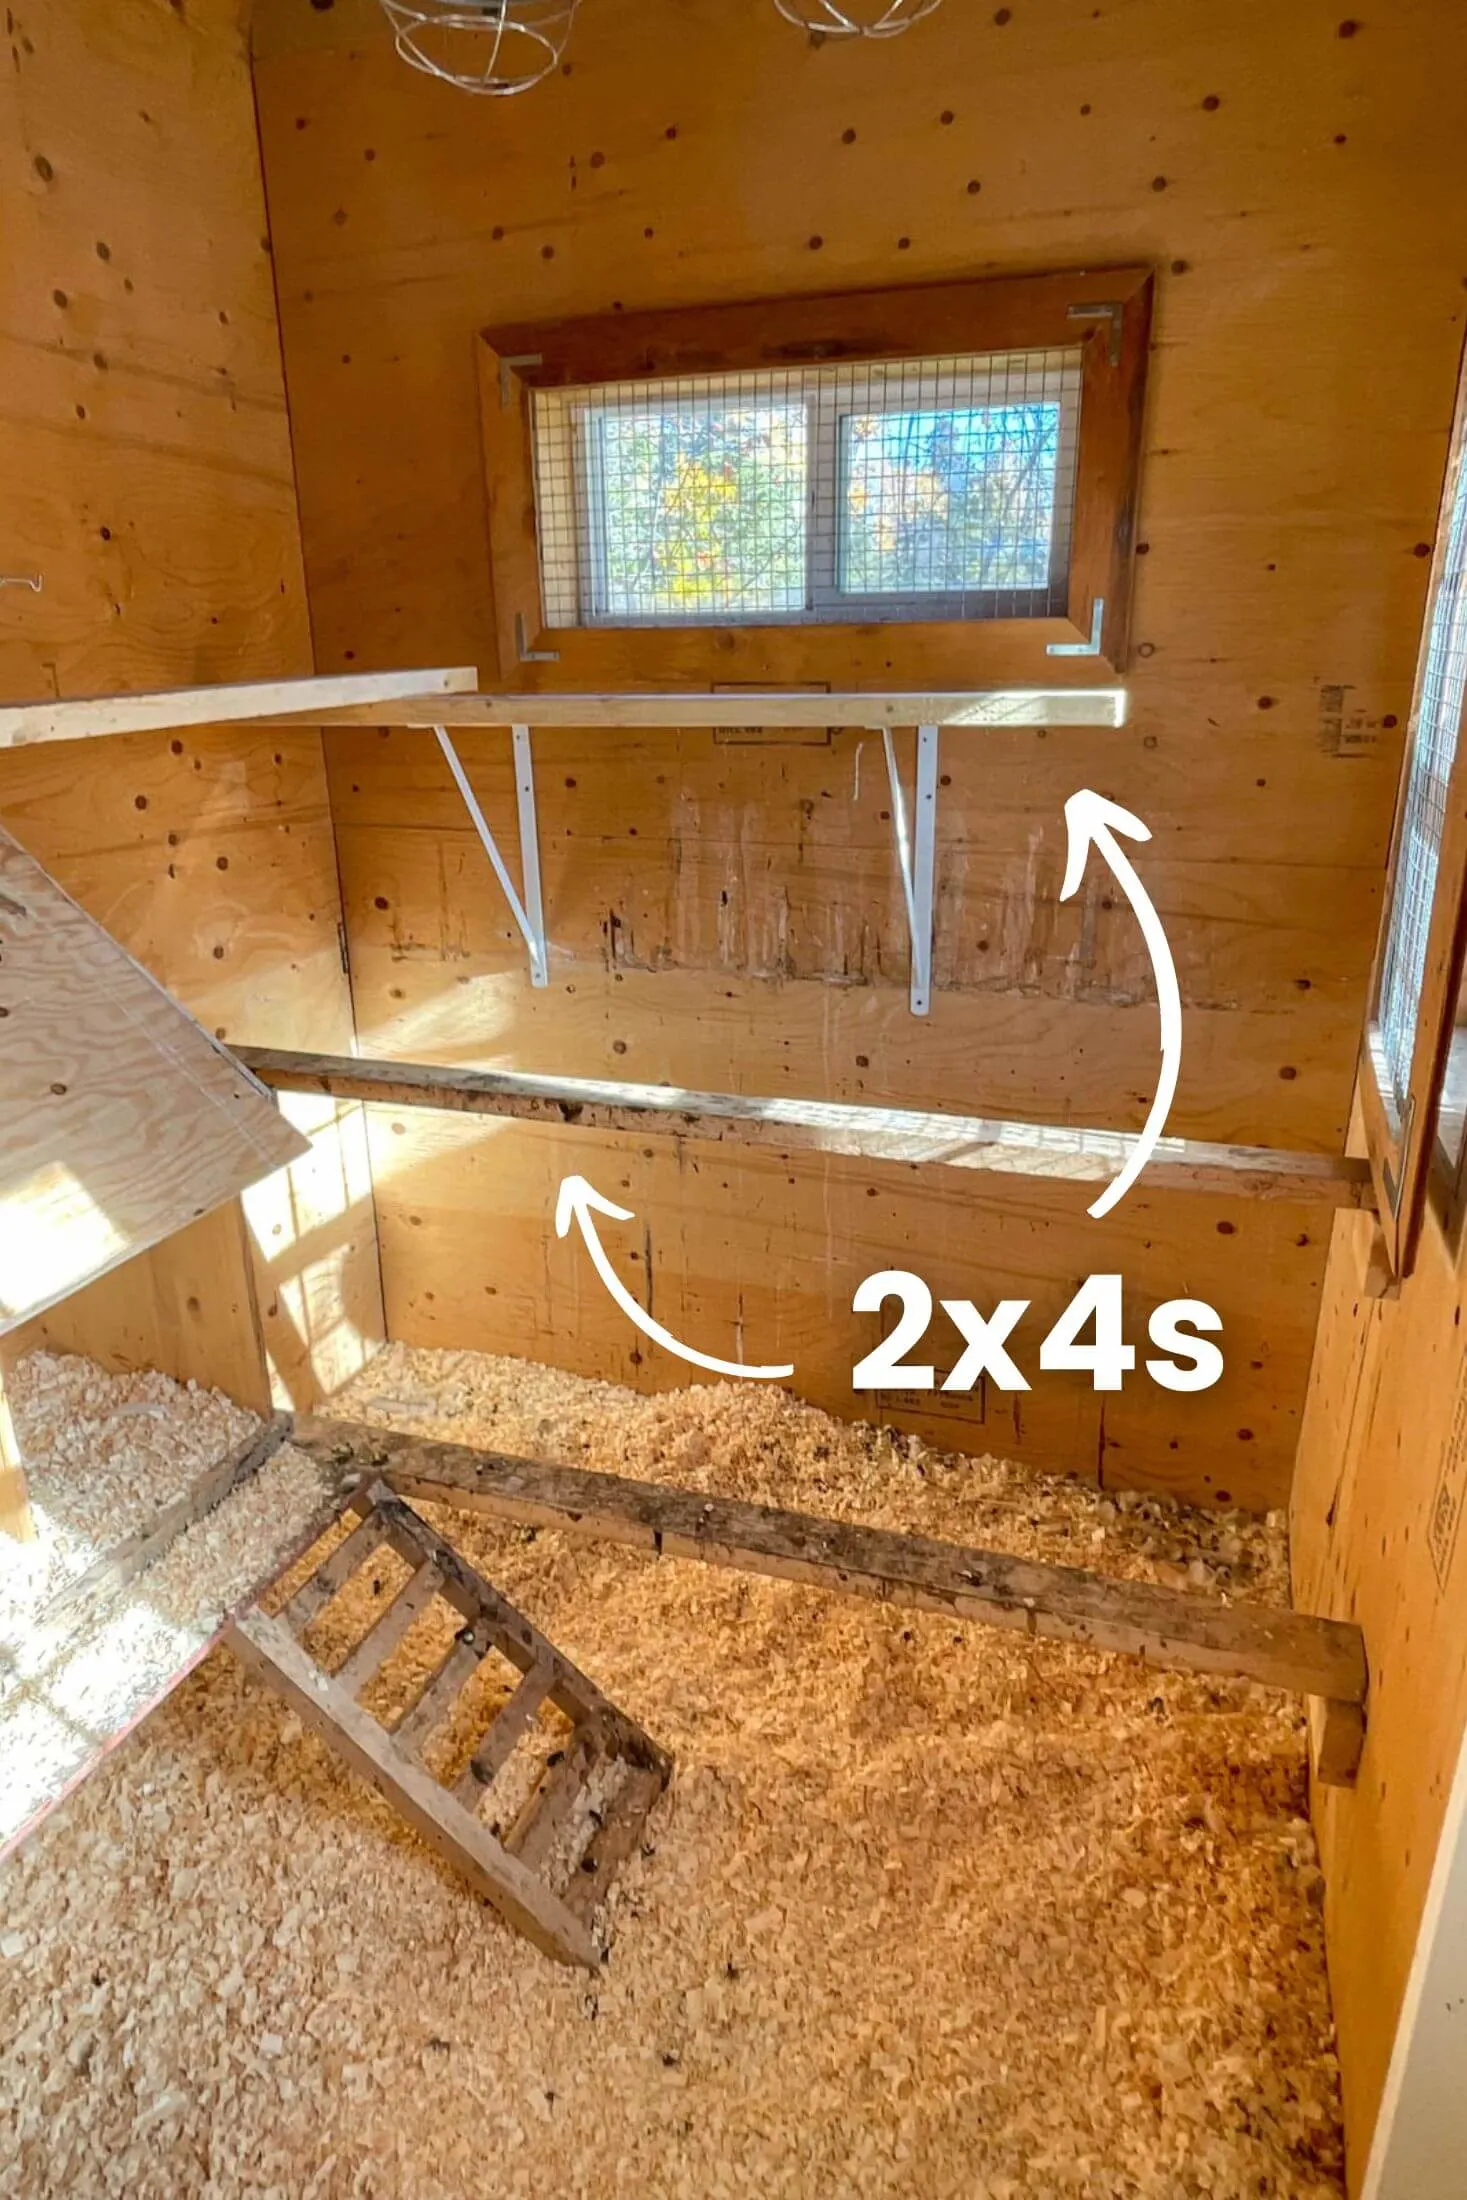 Labeled photo of roosting bars in the coop.